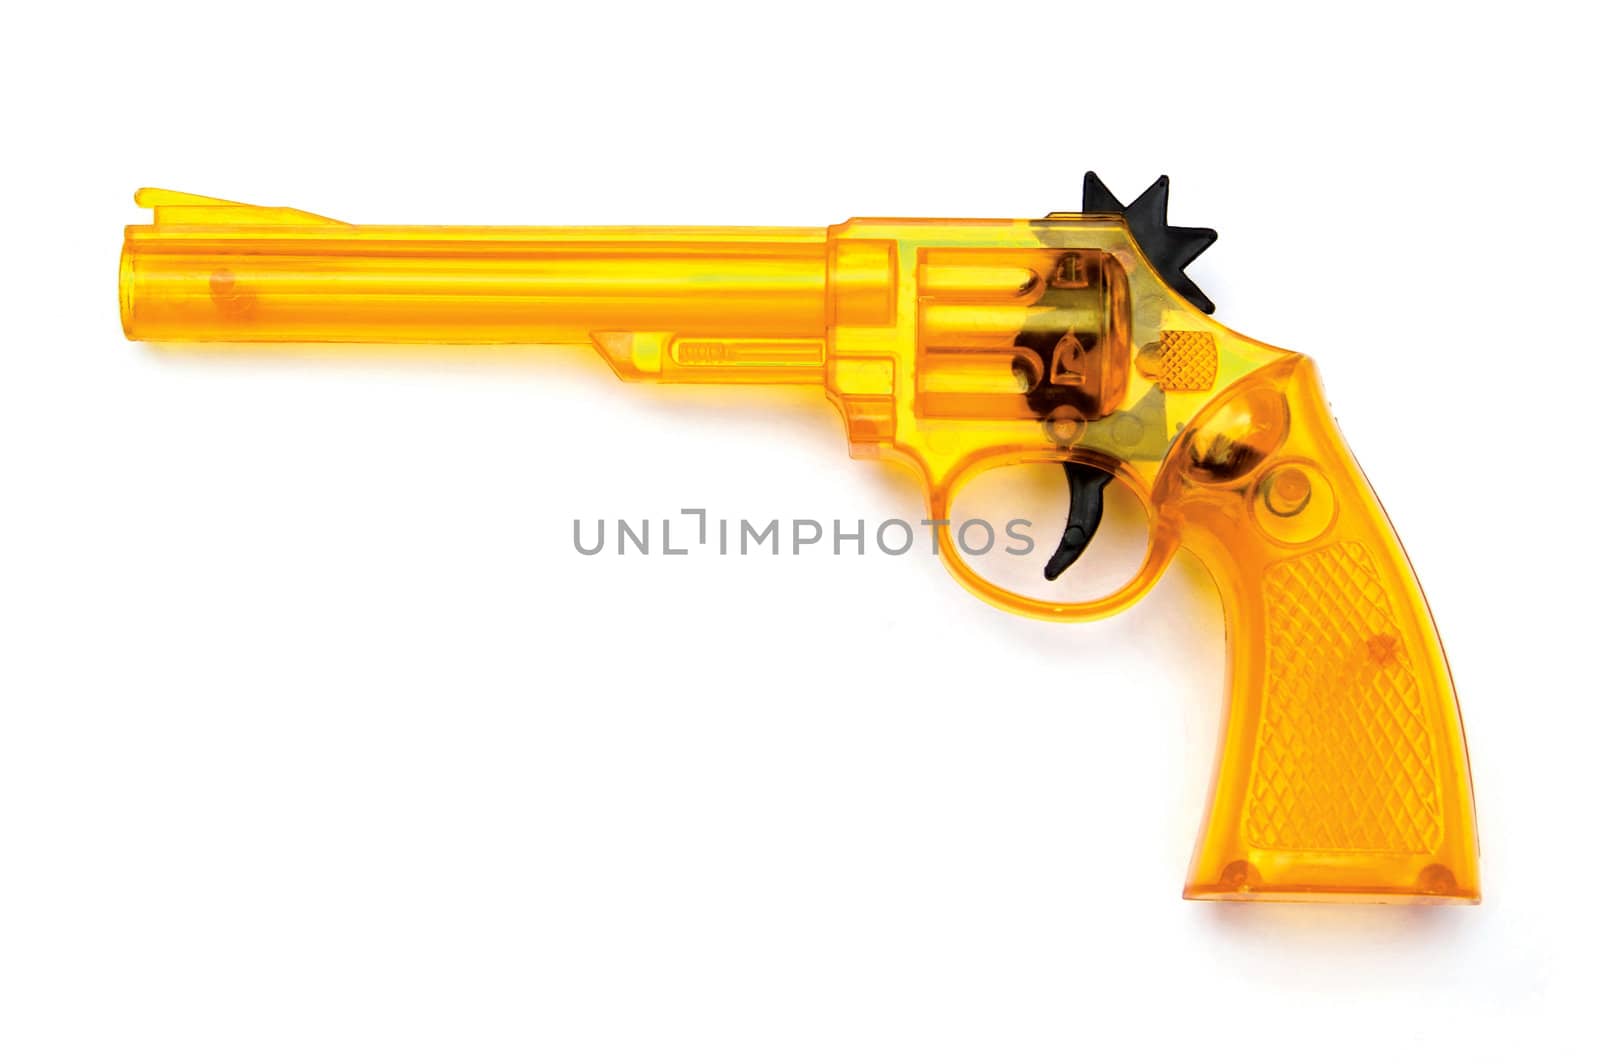 Toy plastic gun for child , on a white background 